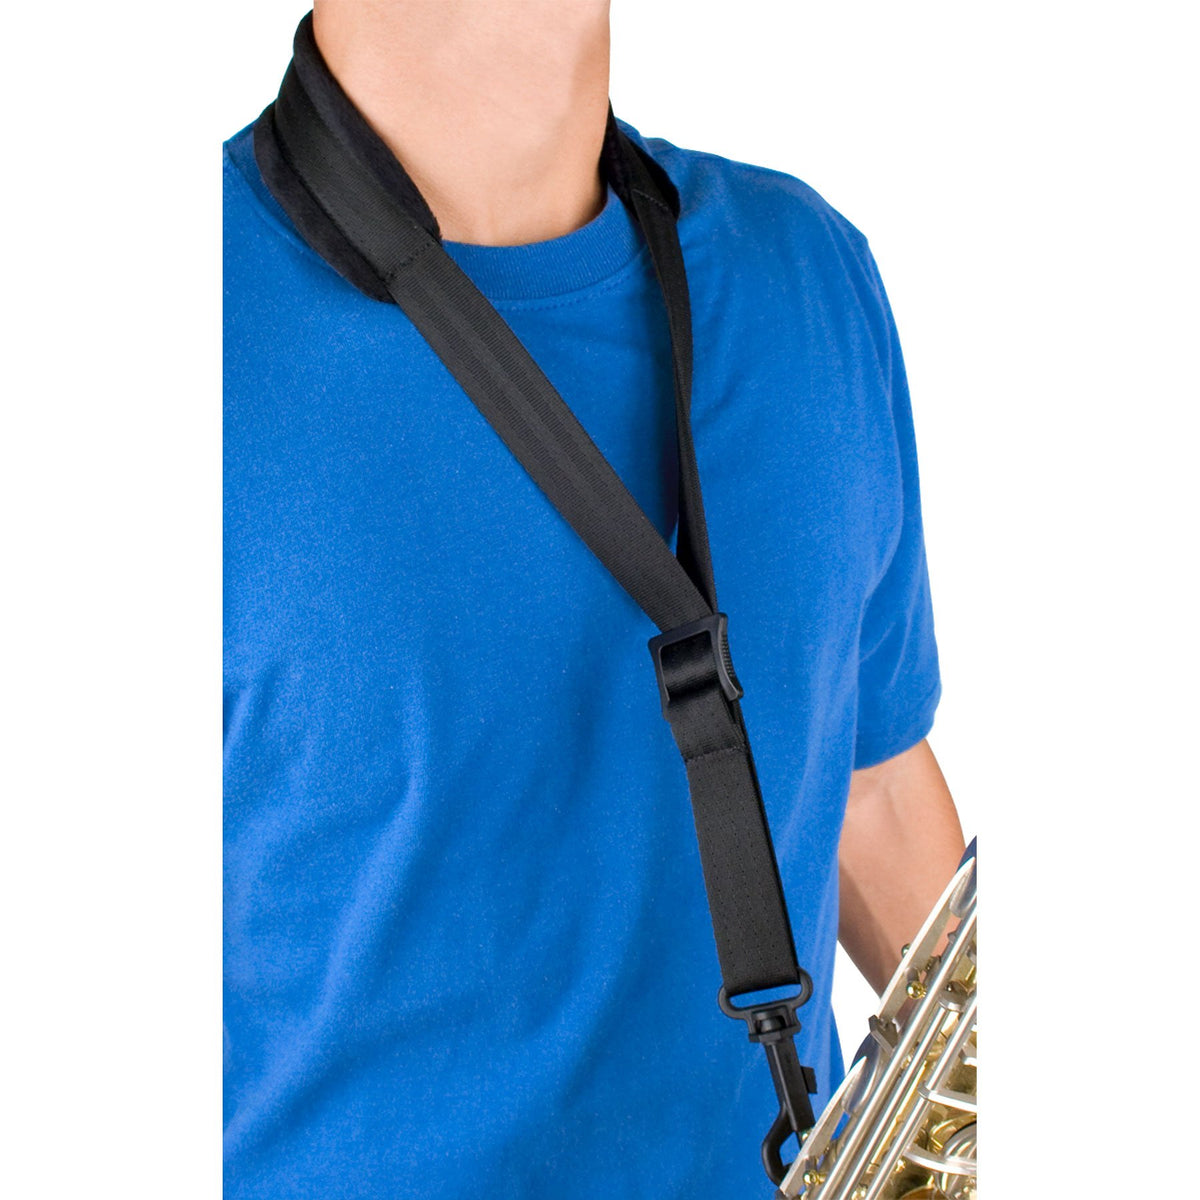 Protec - Saxophone Neck Straps Featuring Velour Neck Pad and Plastic Swivel Snap-Accessories-Protec-Music Elements